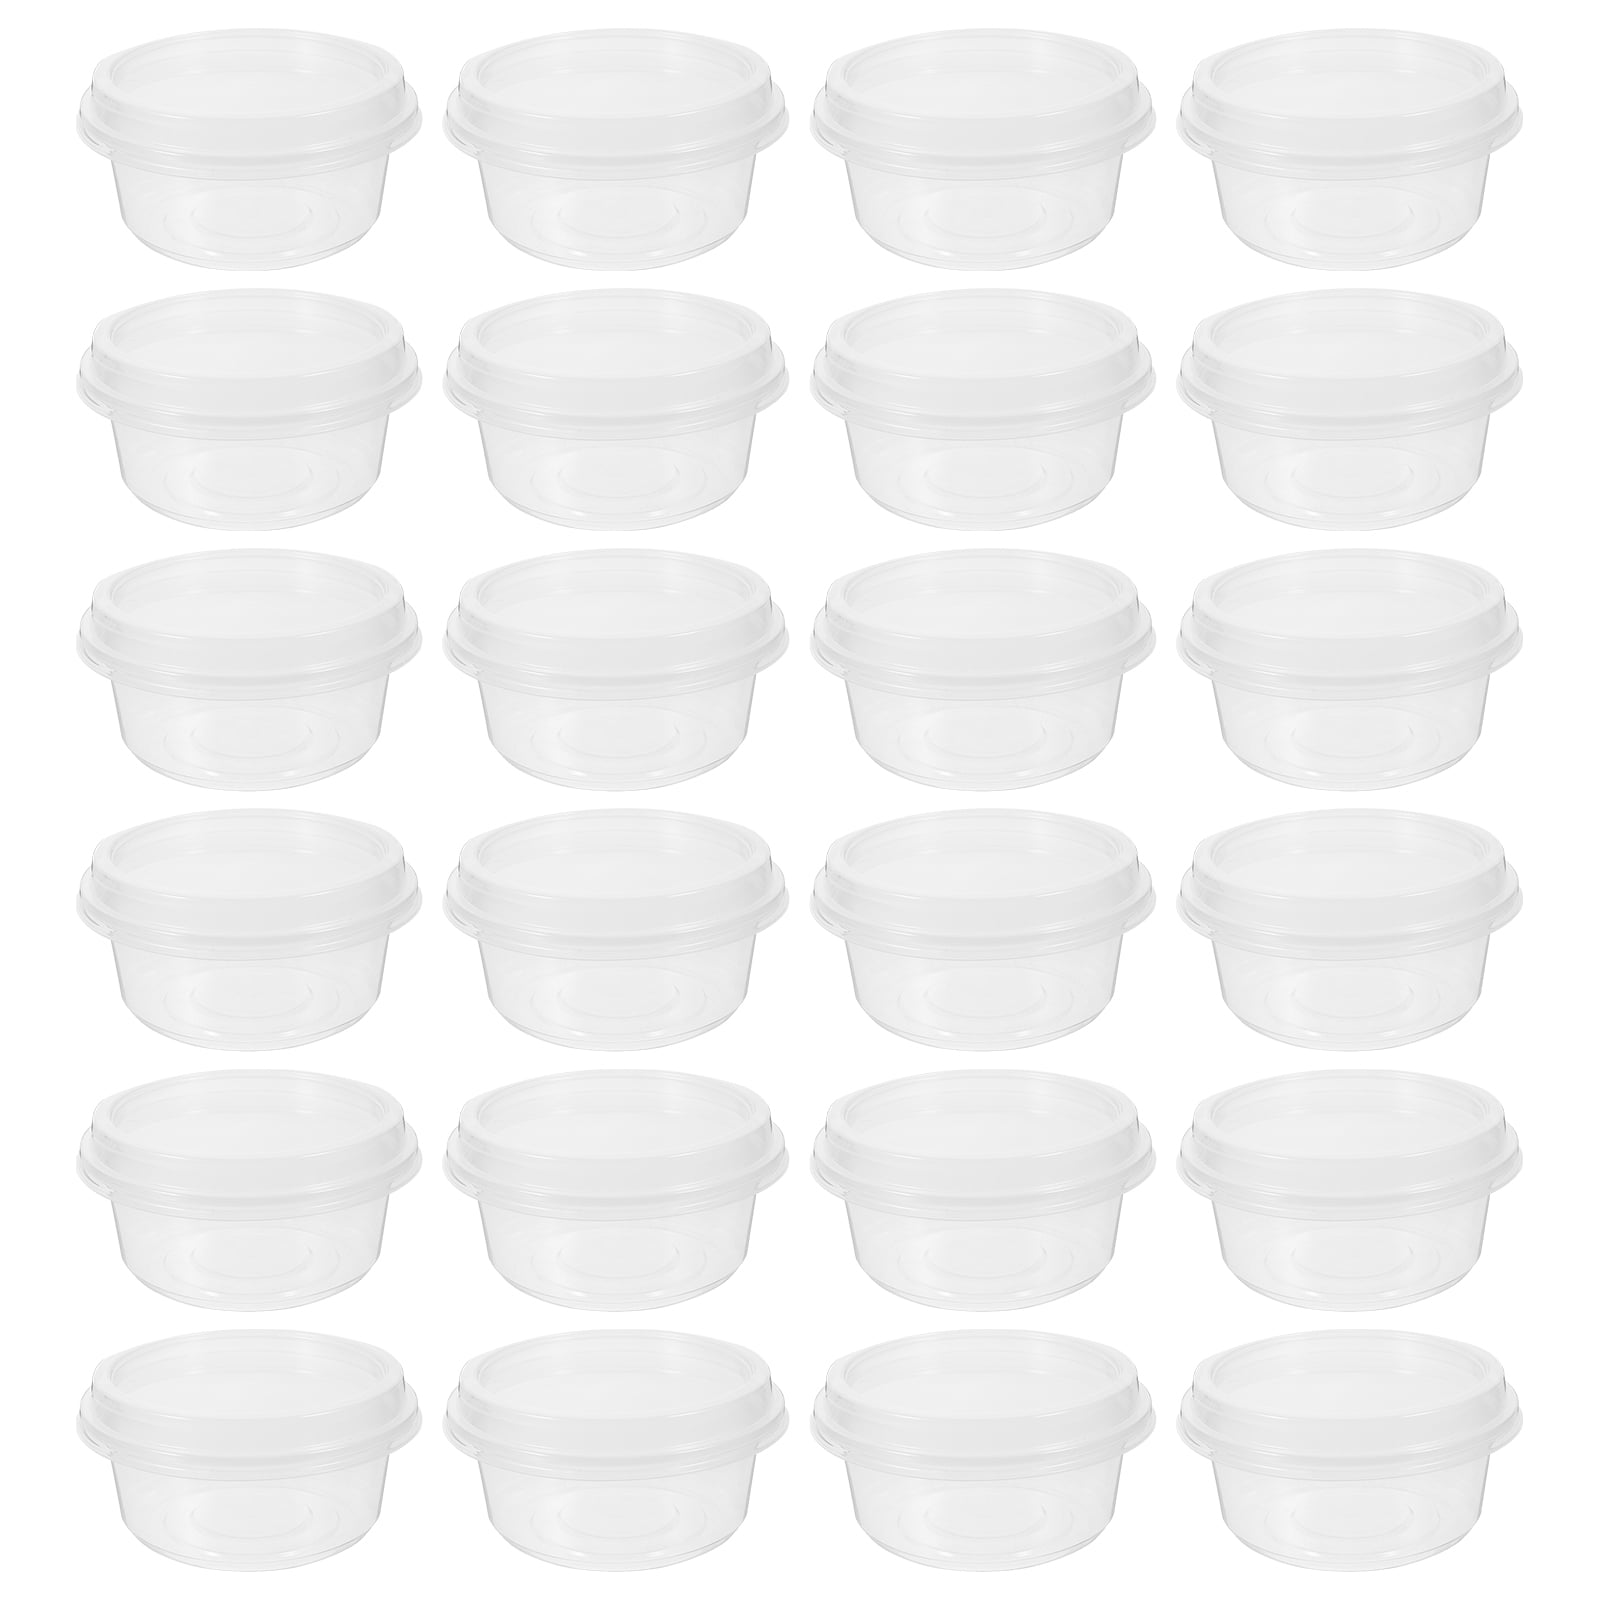 Canaan 50-Pack Large Disposable Bowls with Lids Large Paper Bowls with Lids  Salad Bowls Disposable Food Containers Hot Or Cold Dish To Go Packaging